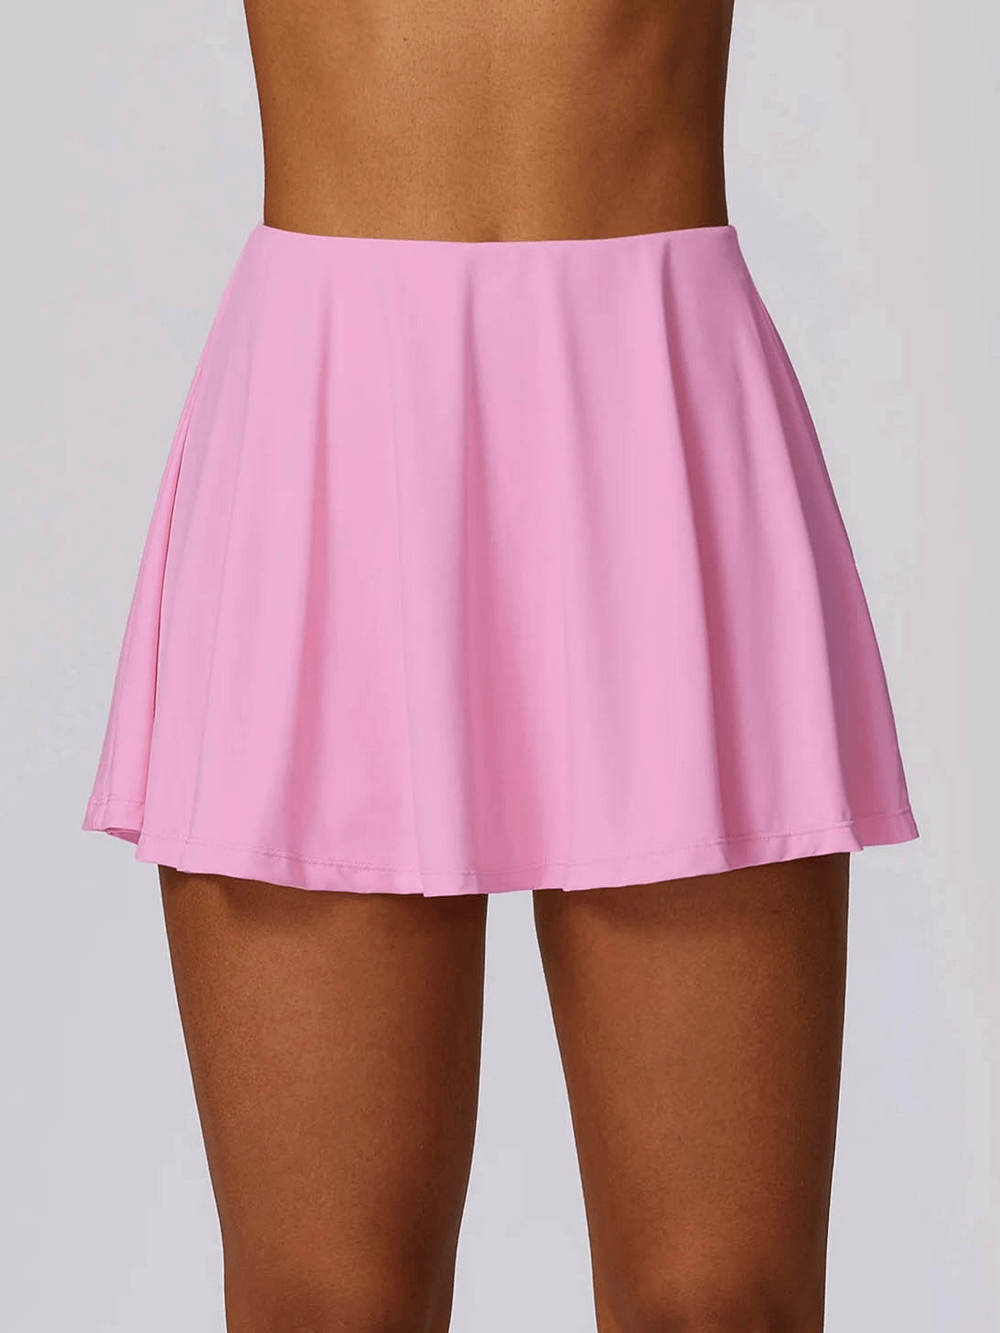 Stylish Women's Flared Sports Skirt for Active - SF2197